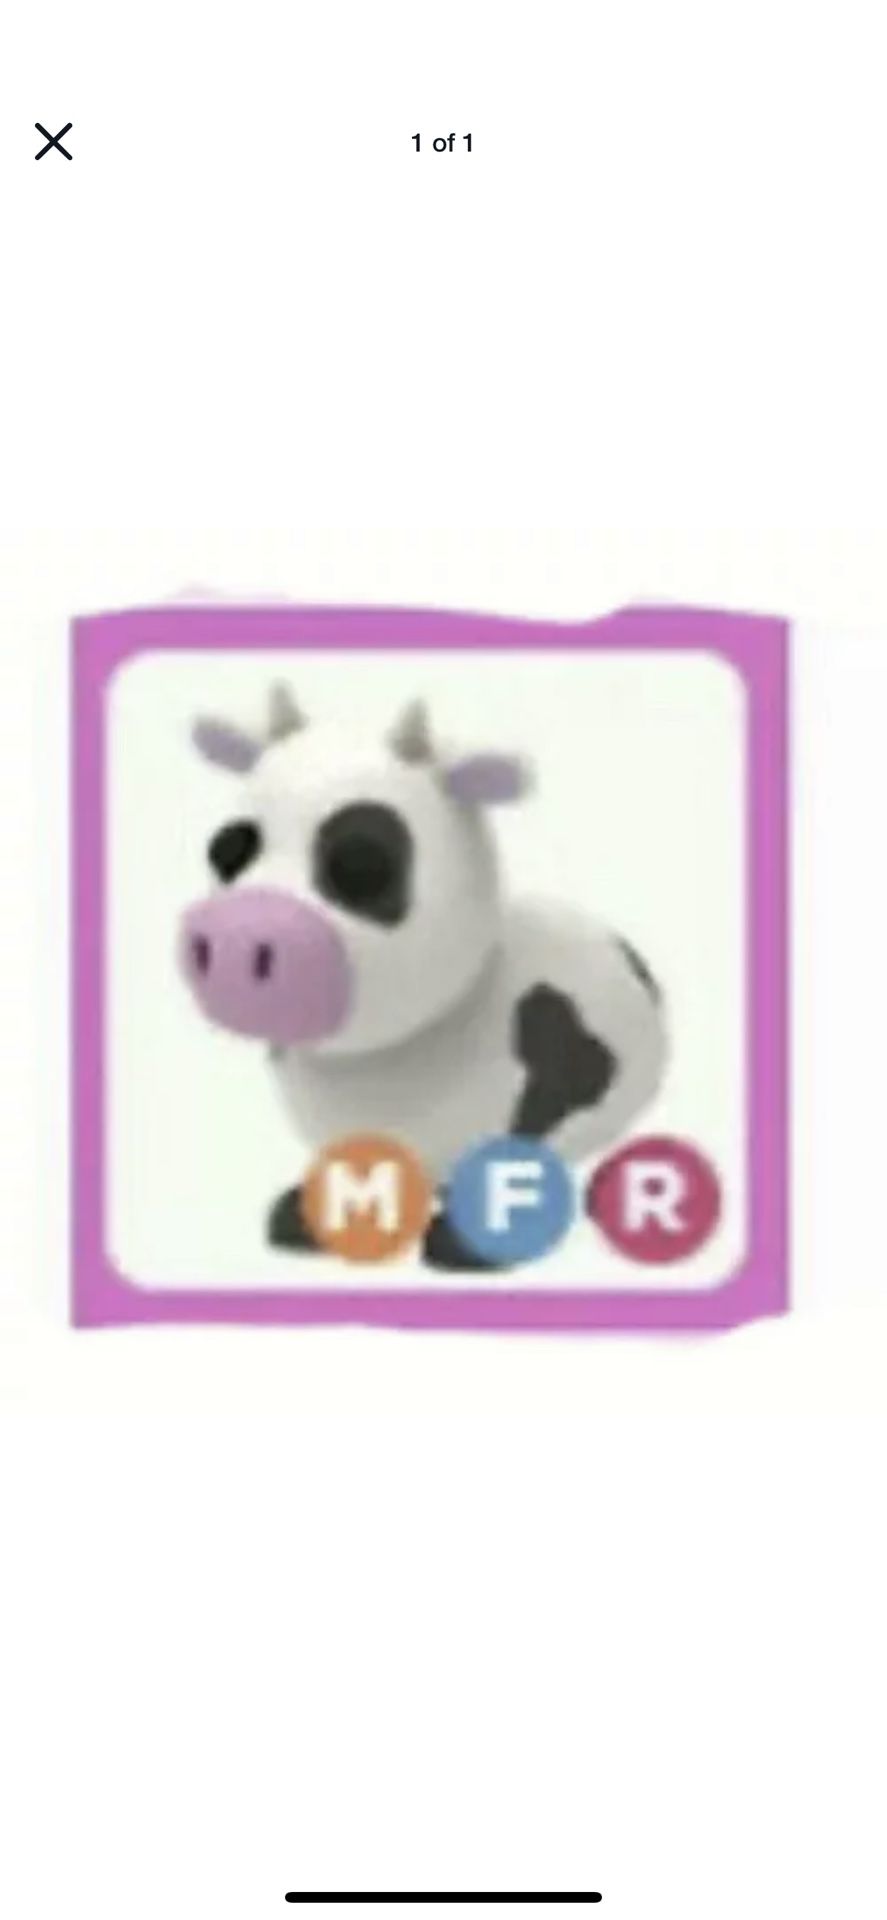 Mega Neon Cow Fly And Ride Adopt Me Roblox For Sale In La Mesa Ca Offerup - roblox adopt me pets neon cow